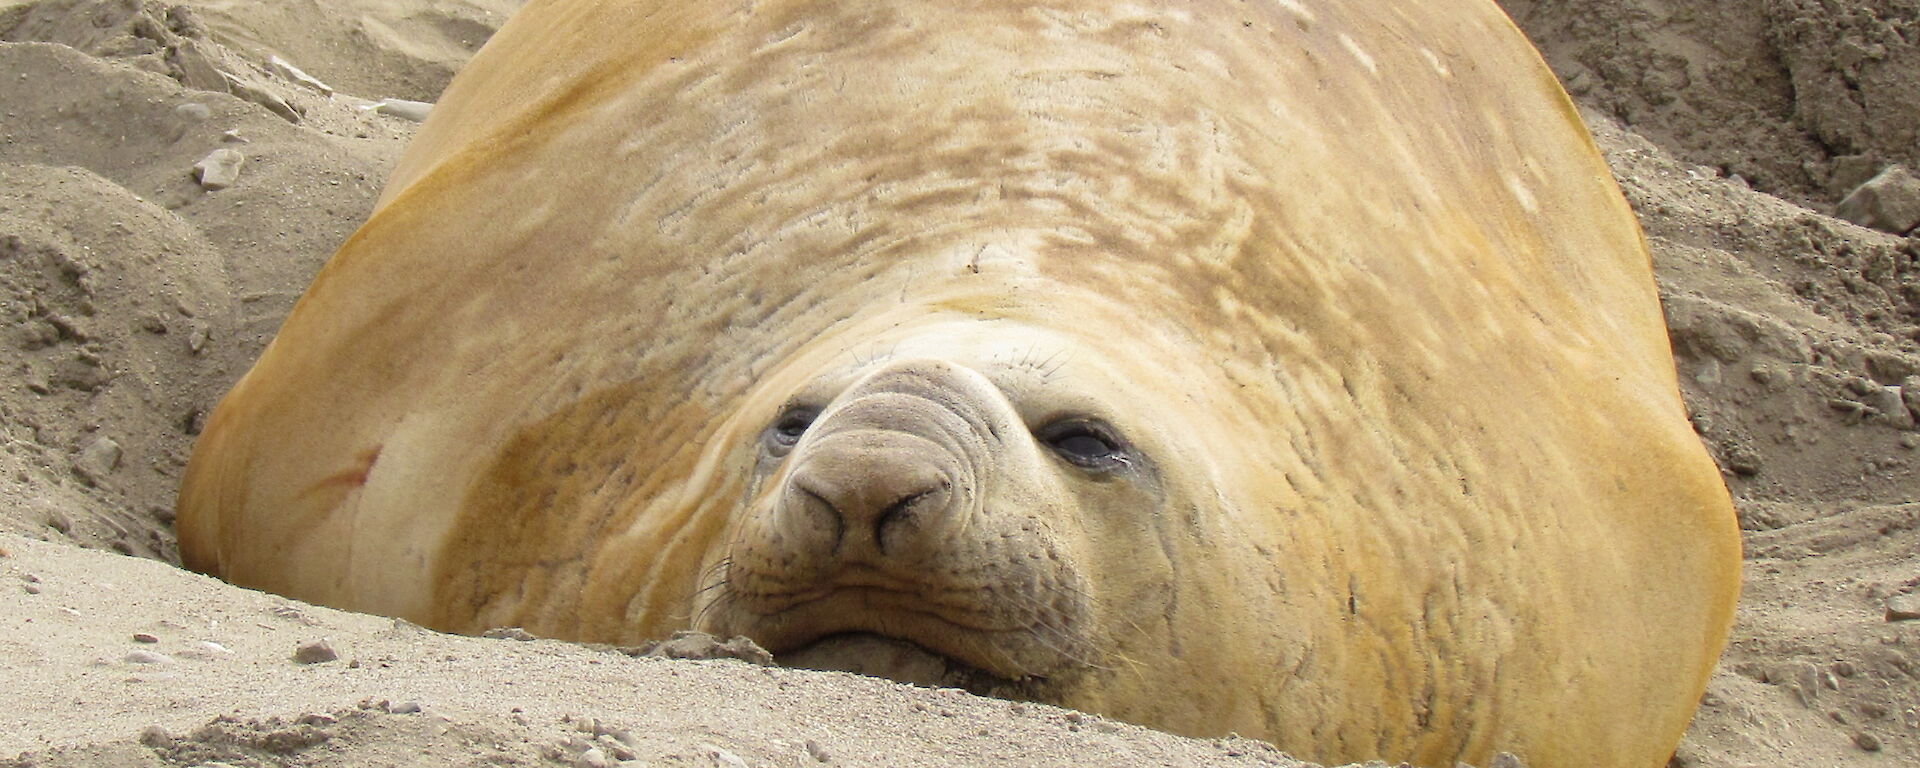 Well-fed elephant seal ready to moult